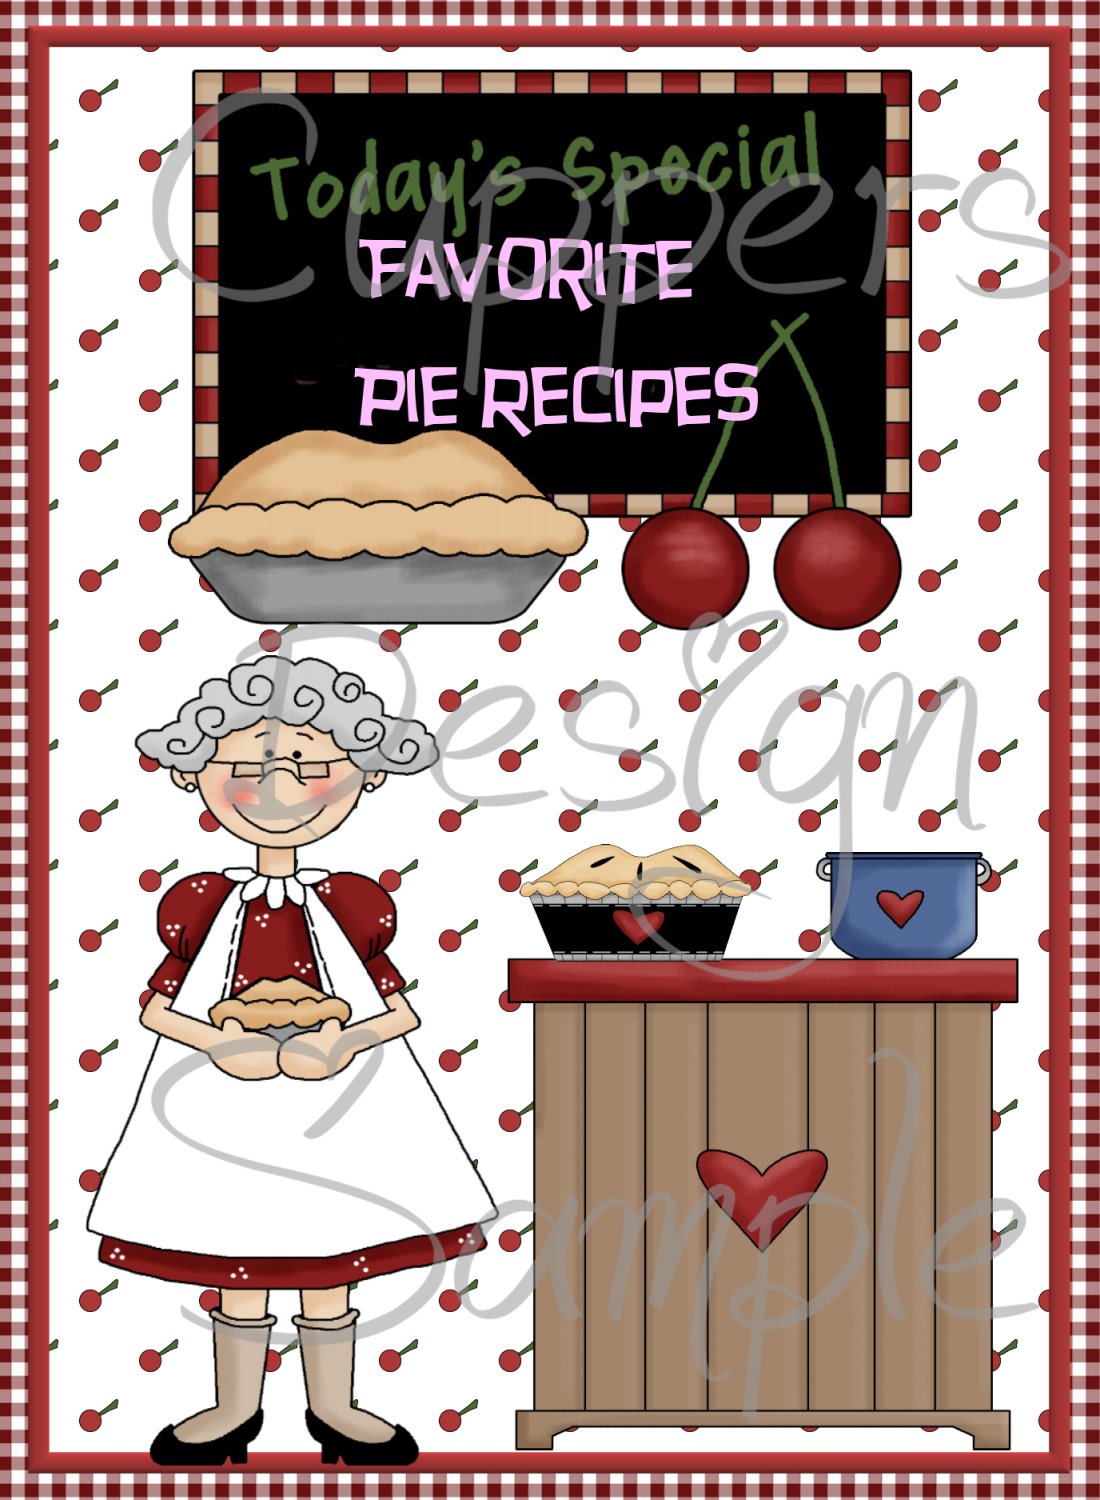 Best Pies Recipe Book Cookbook Recipes Album Style Food Baking Candy Making 0819